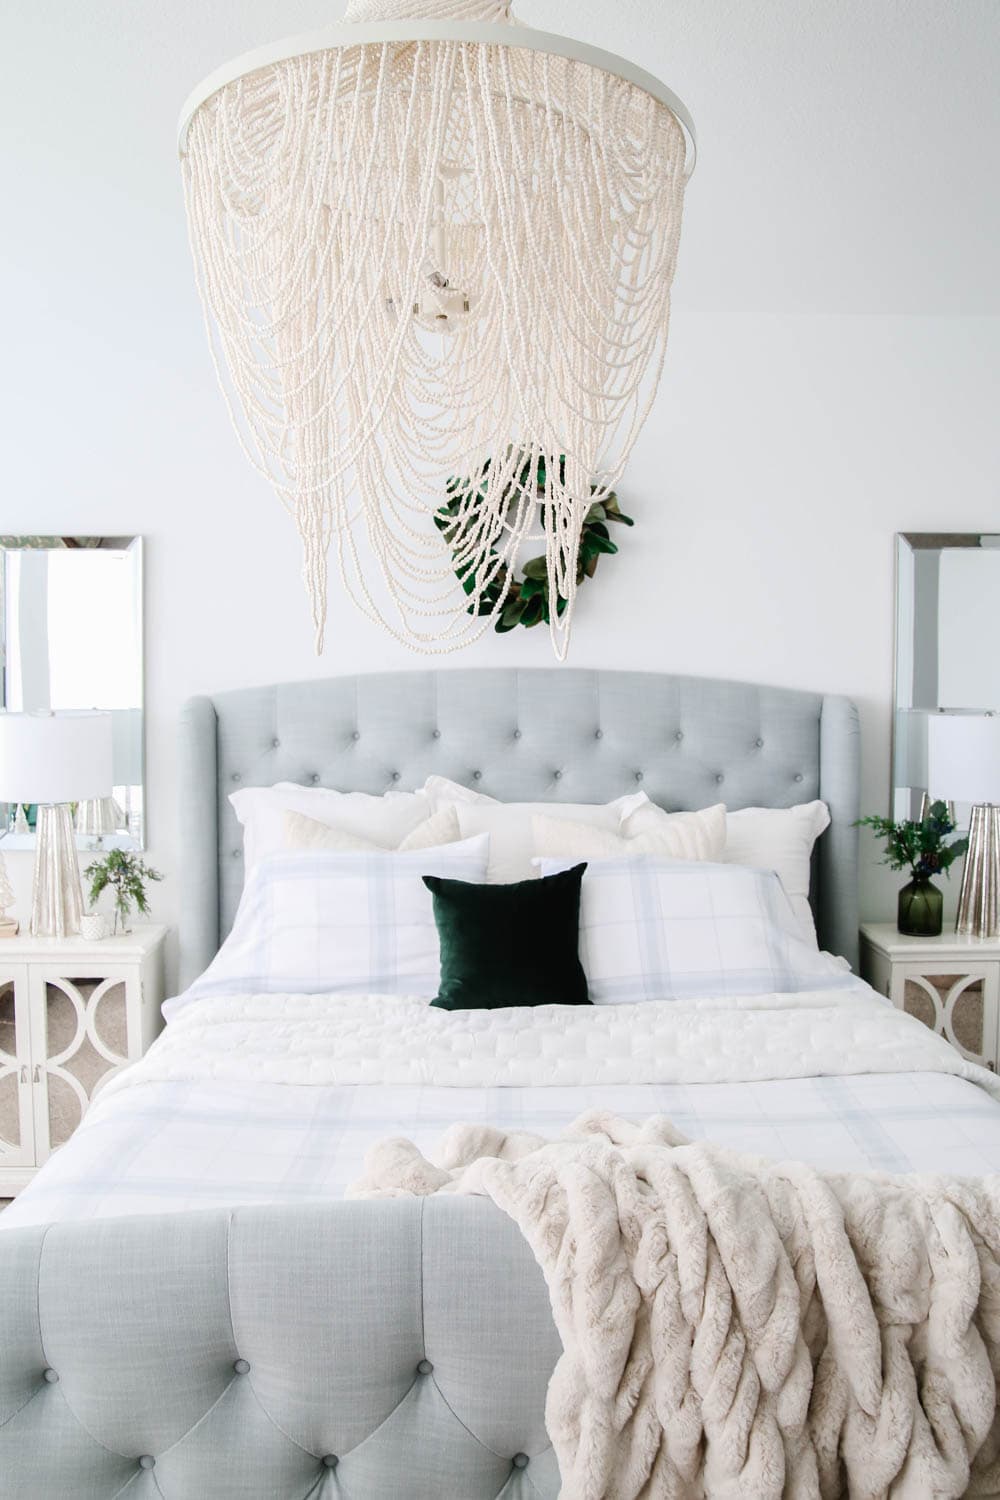 5 Ways to Update Your Bedroom for The Holidays